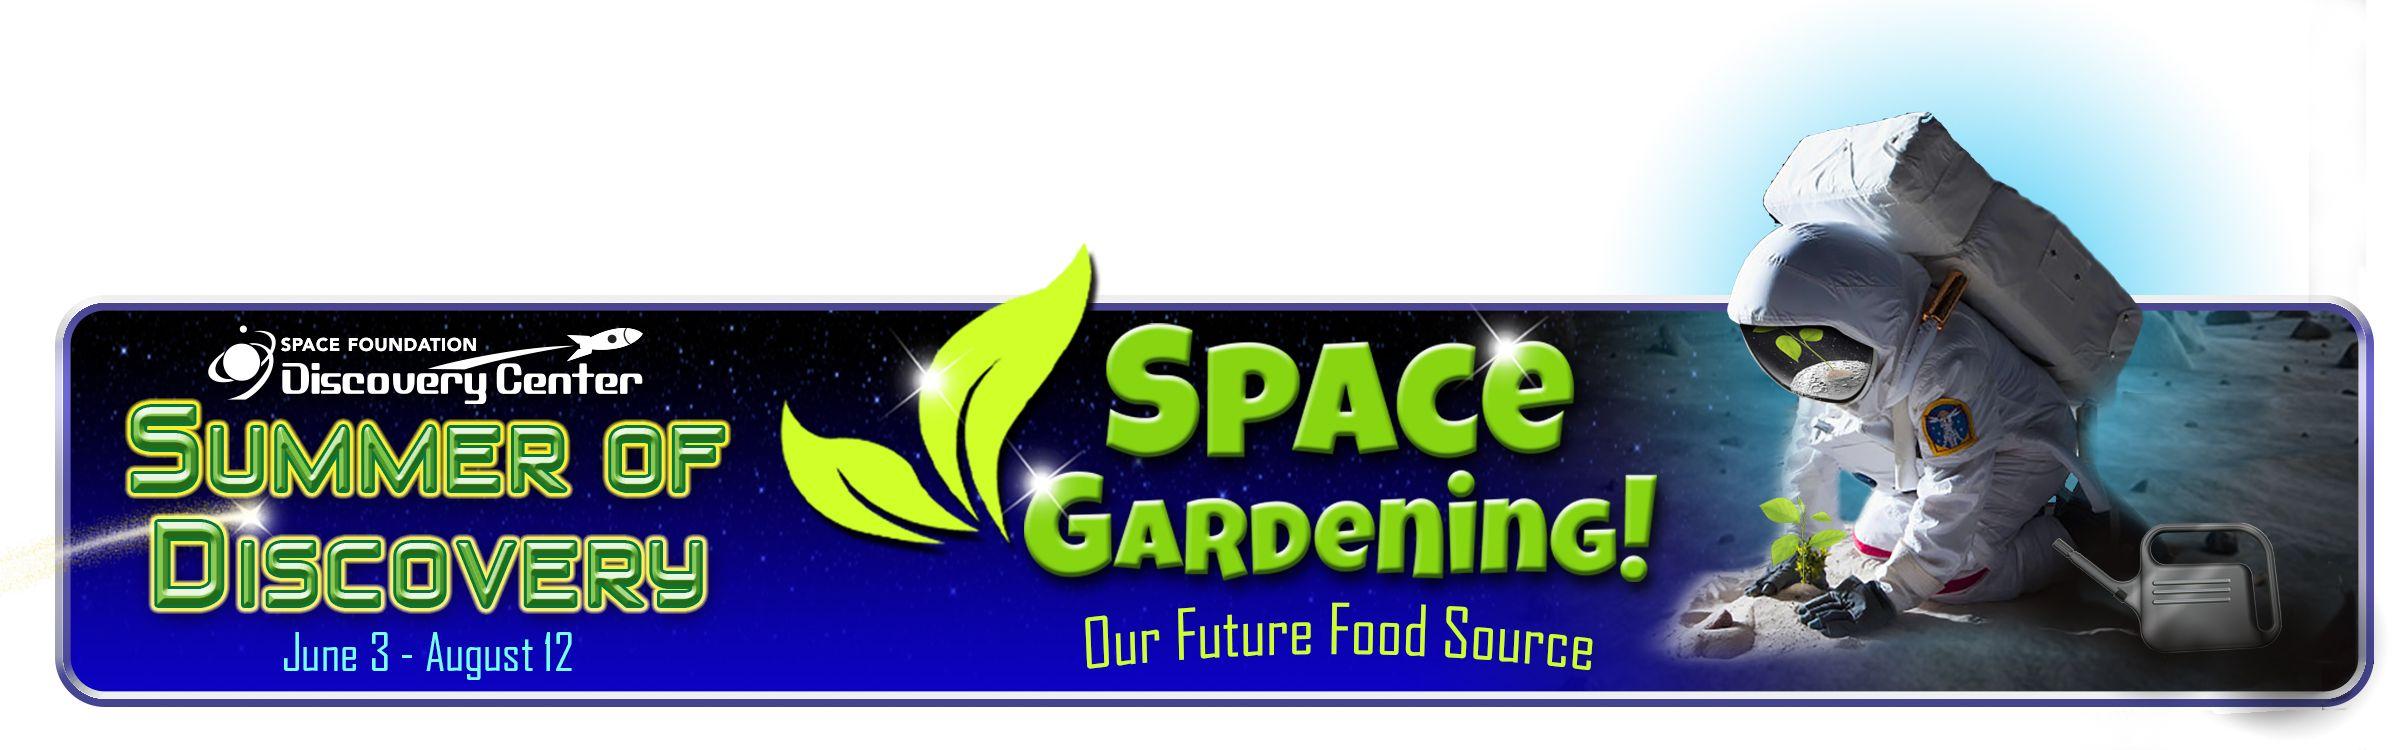 Space Foundation Logo - News. Space Foundation Discovery Center